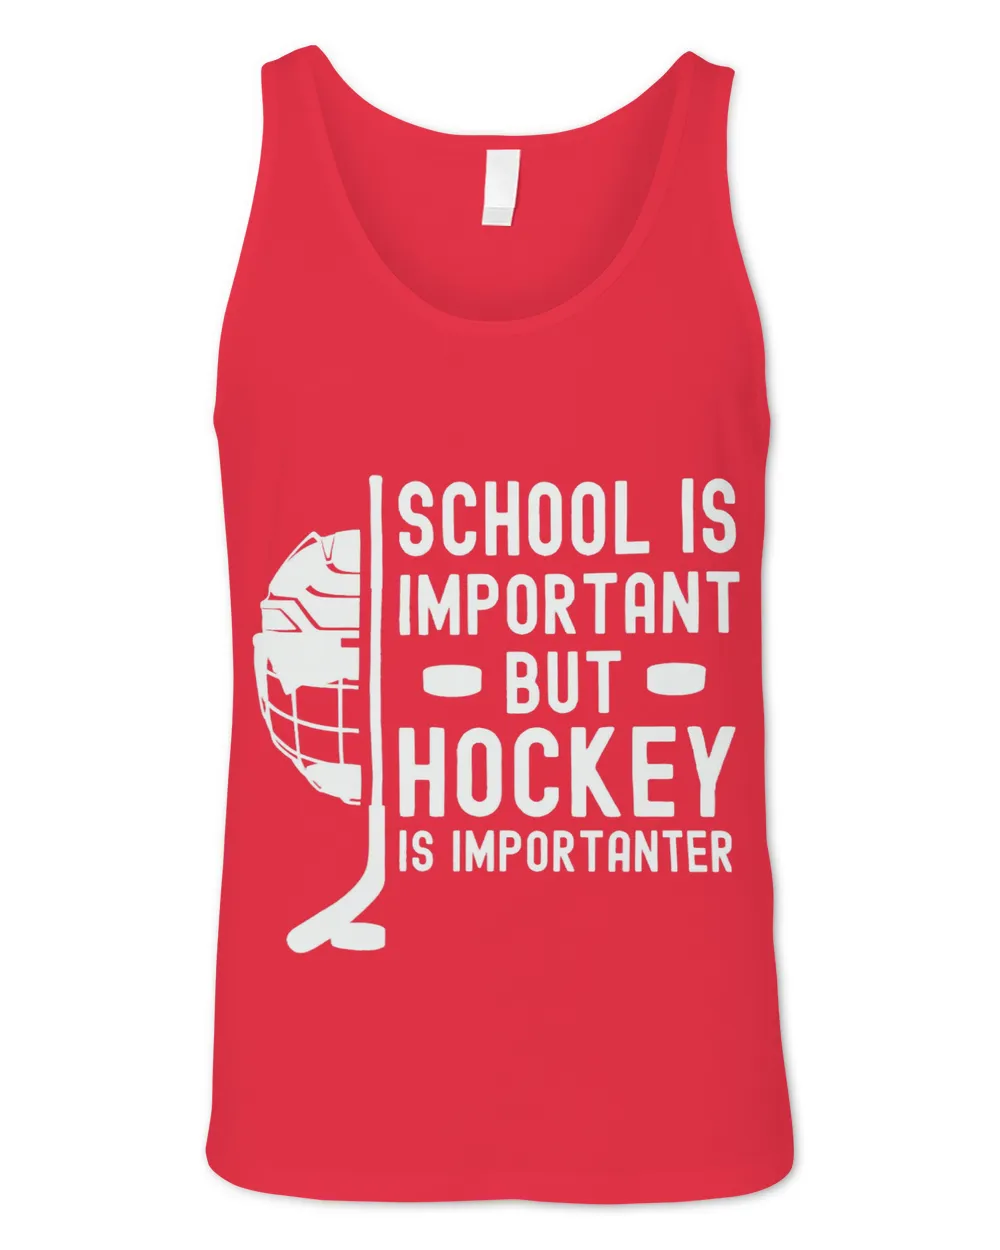 School is Important But Hockey is Importanter